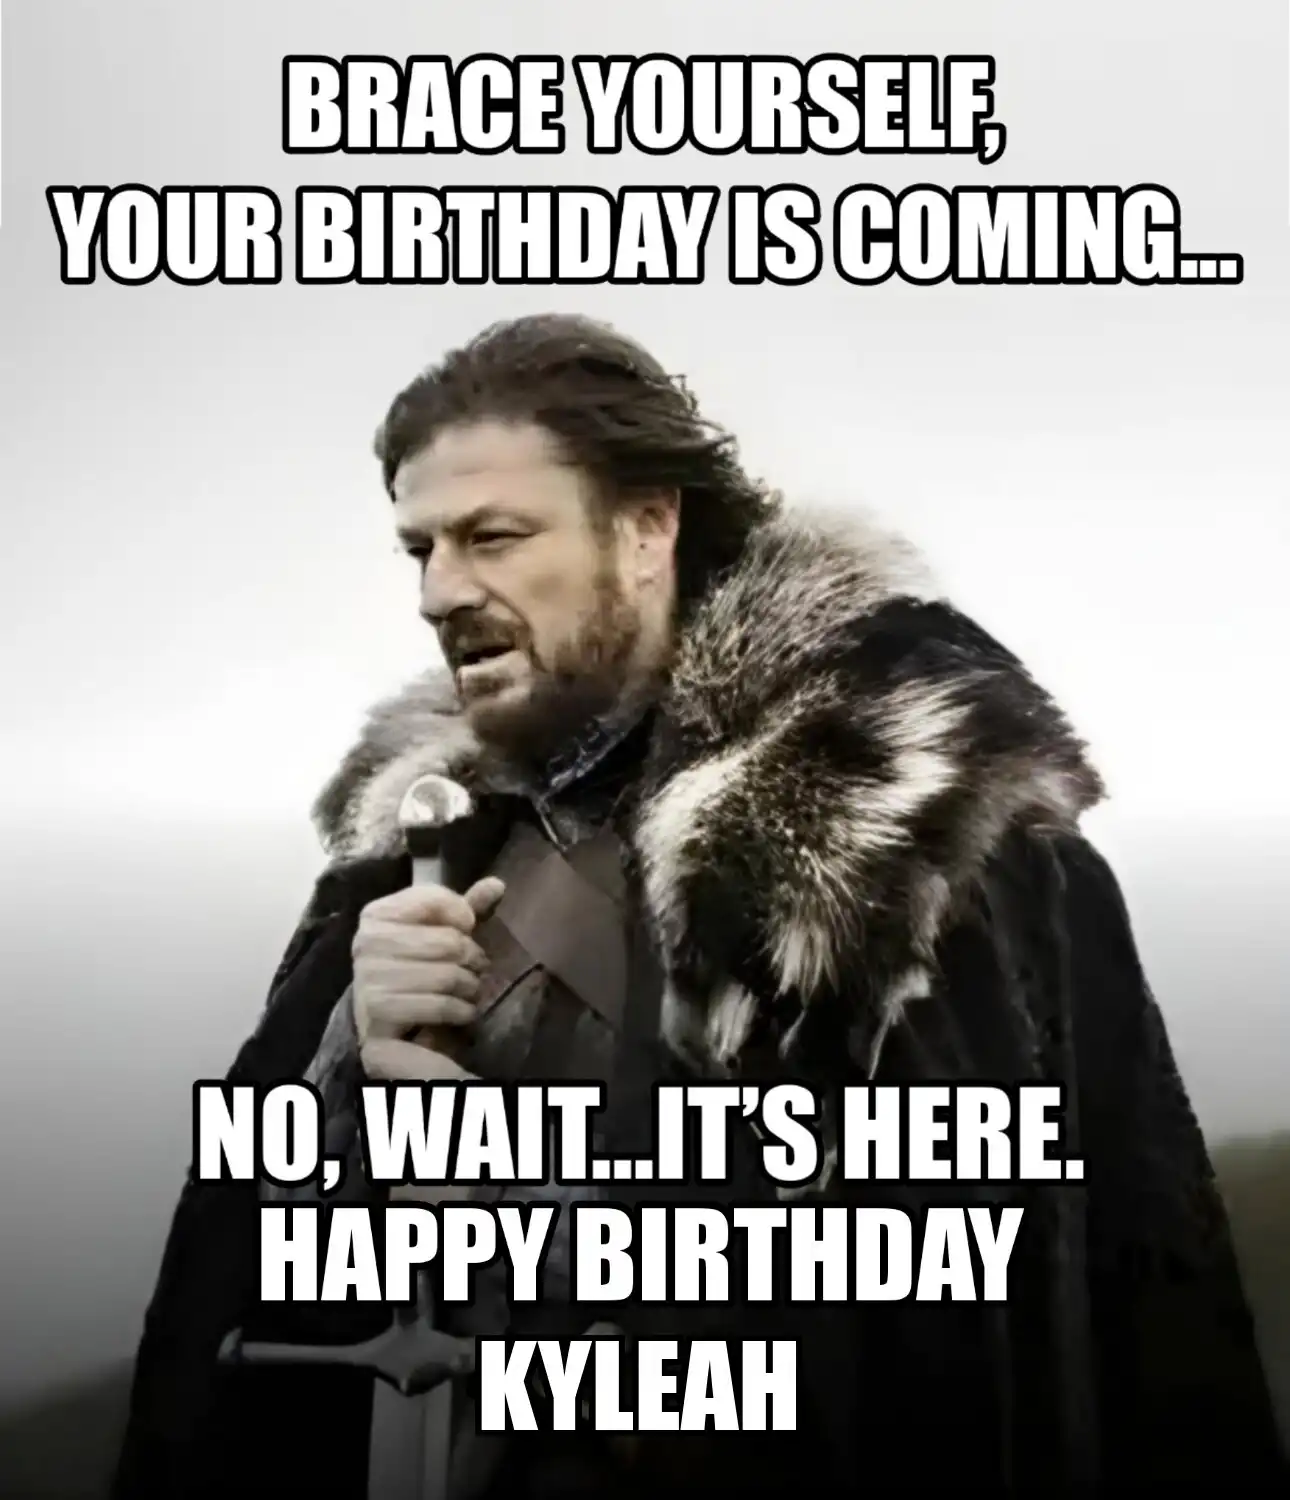 Happy Birthday Kyleah Brace Yourself Your Birthday Is Coming Meme